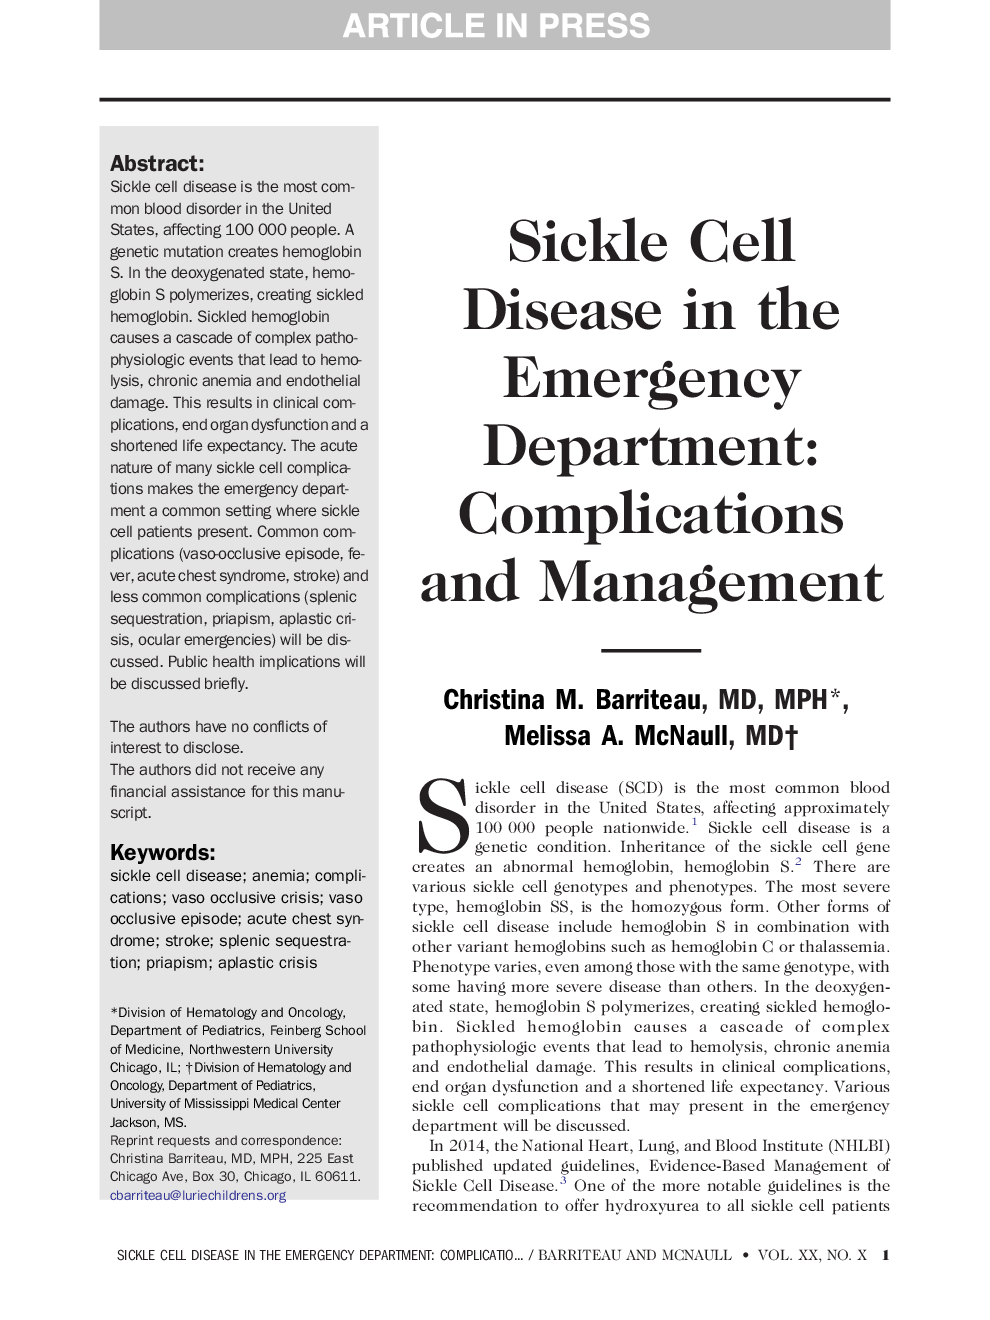 Sickle Cell Disease in the Emergency Department: Complications and Management